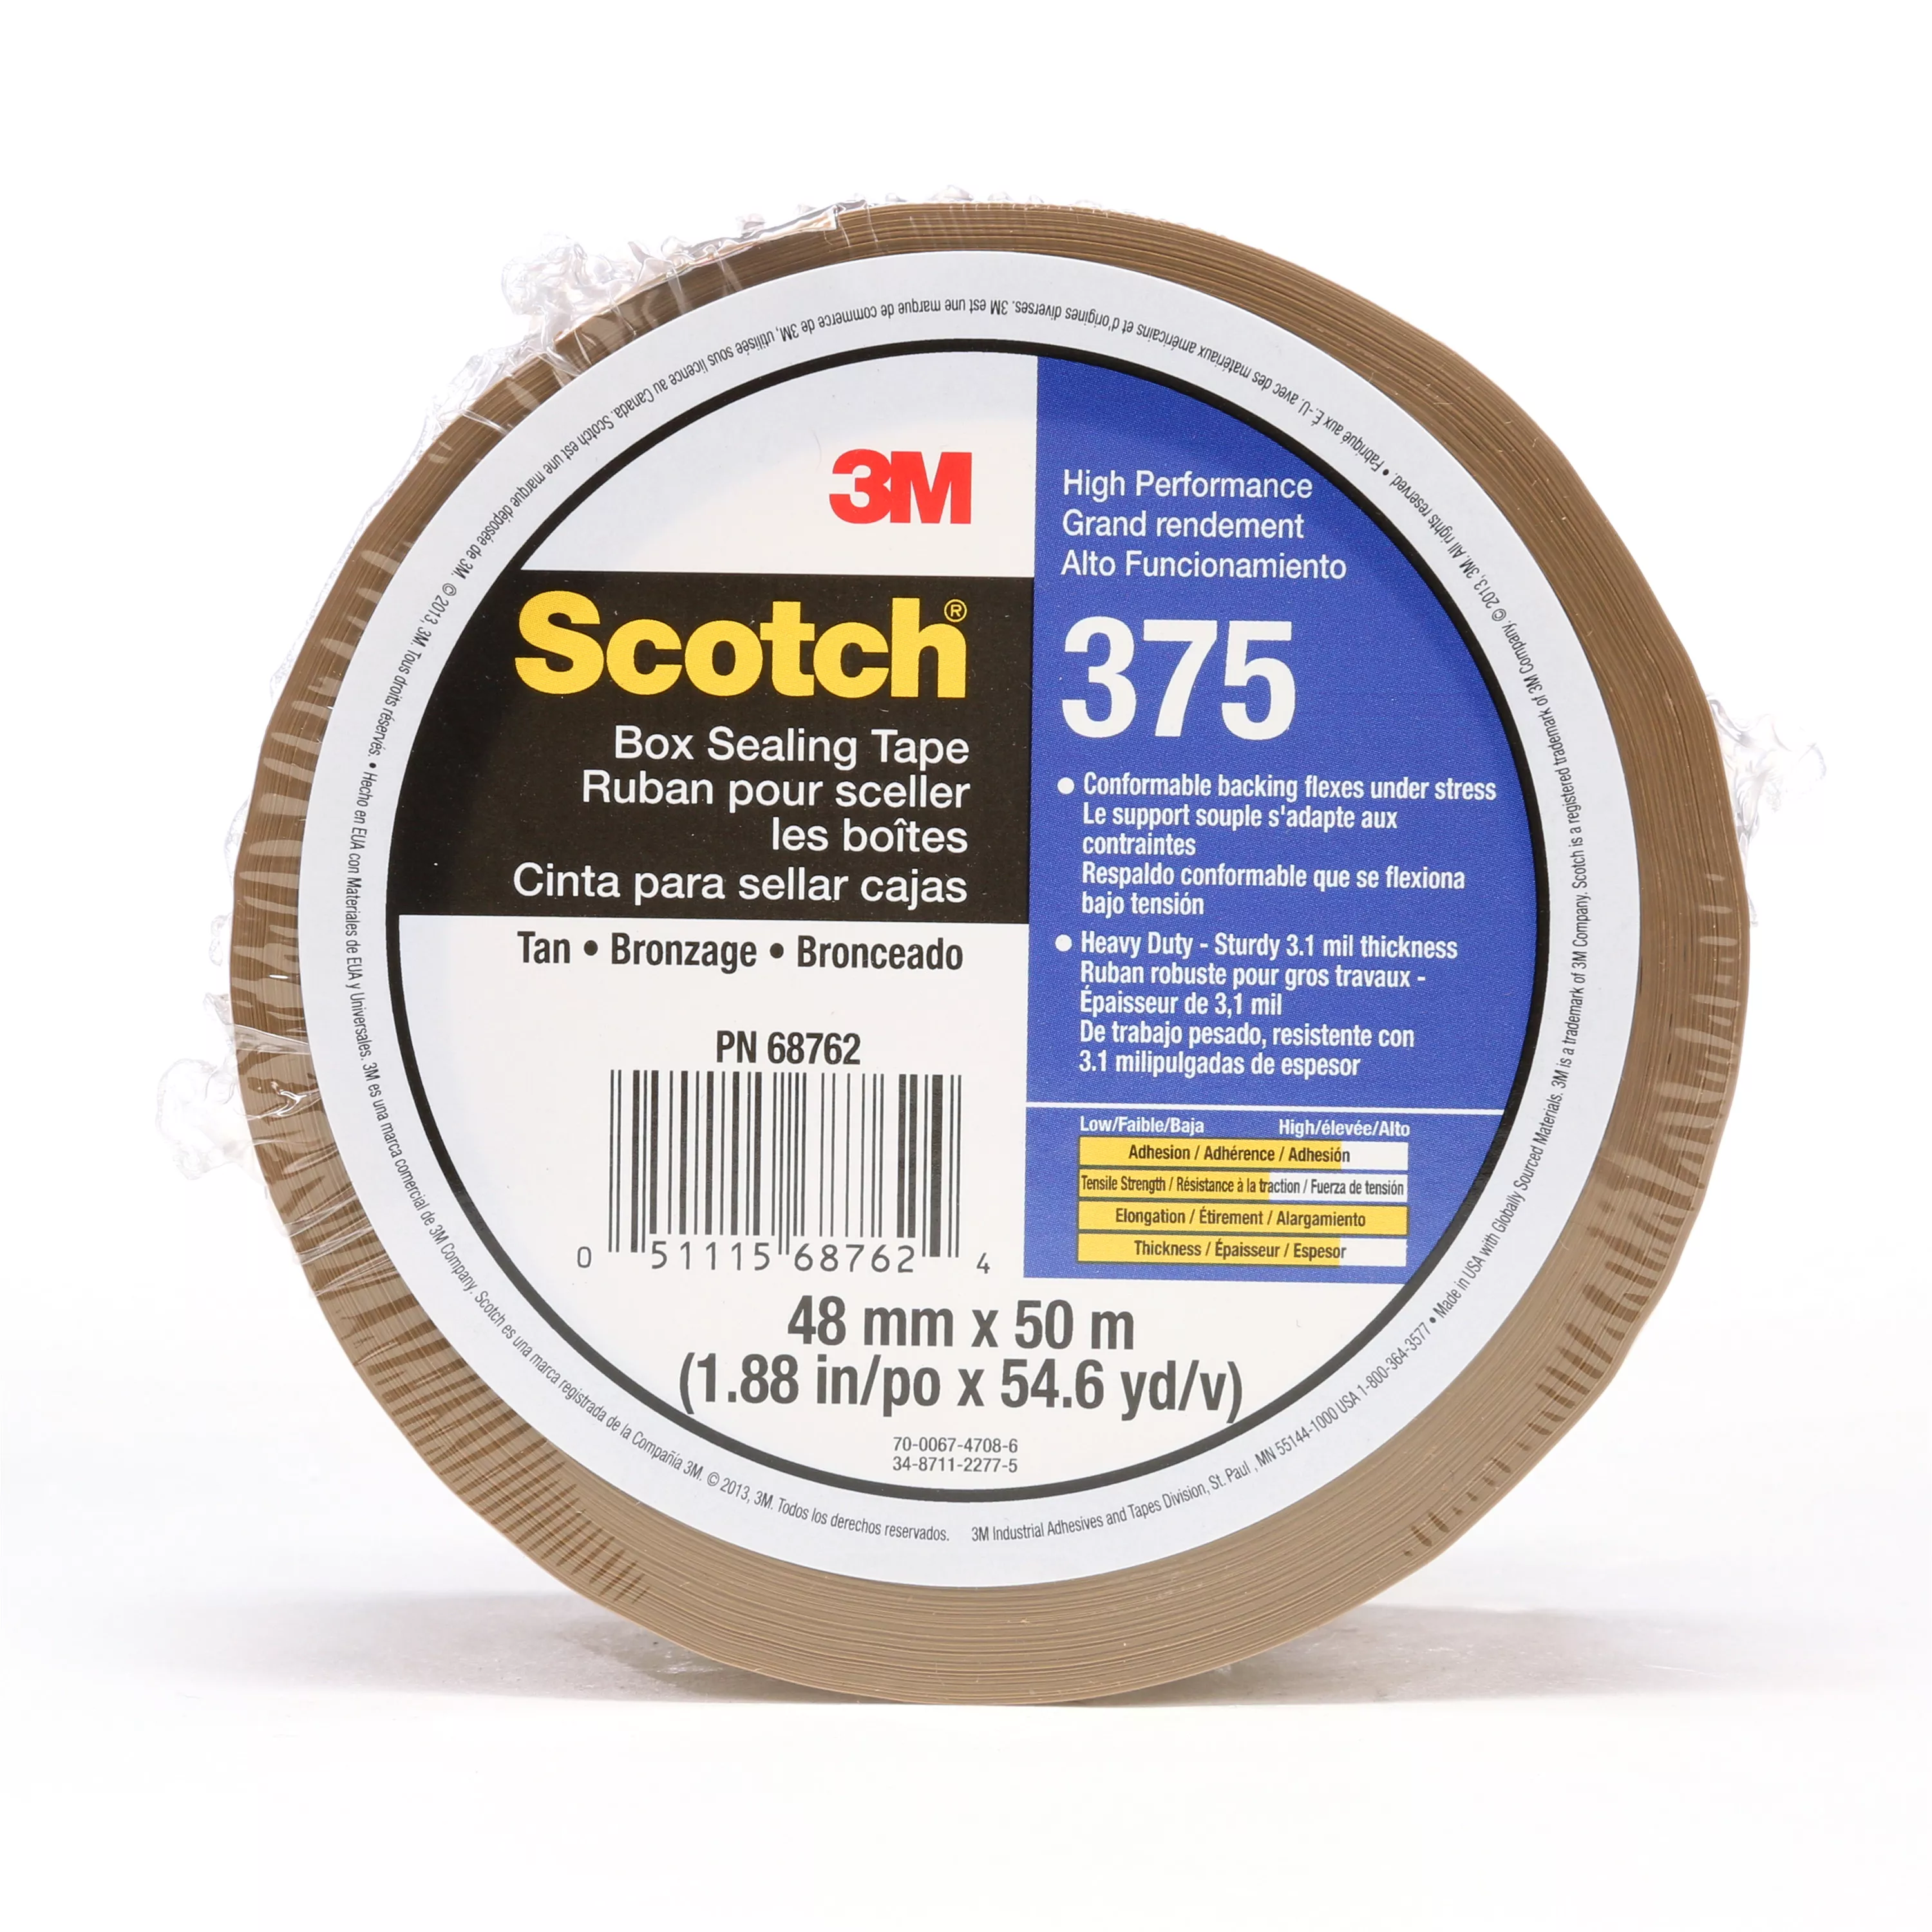 Scotch® Box Sealing Tape 375, Tan, 48 mm x 50 m, 36/Case, Individually
Wrapped Conveniently Packaged